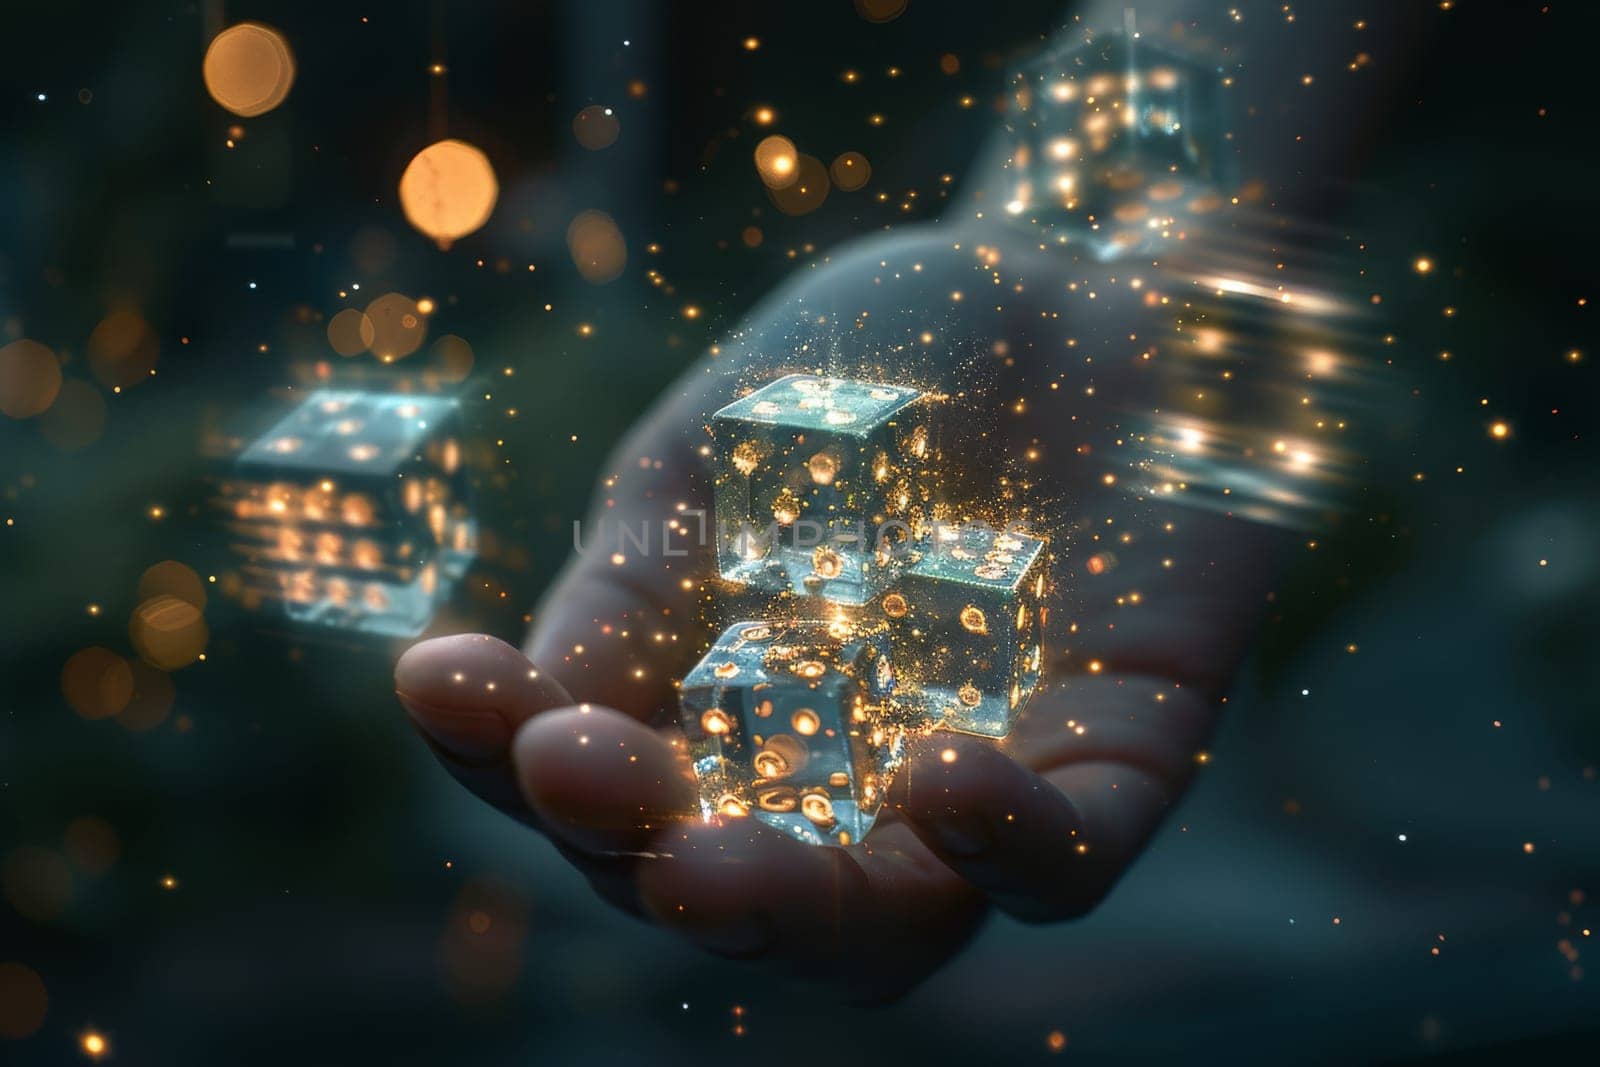 A hand holding a bunch of cubes with a blurry background. The cubes are lit up and appear to be glowing. The image has a dreamy, surreal quality to it, as if the cubes are floating in mid-air